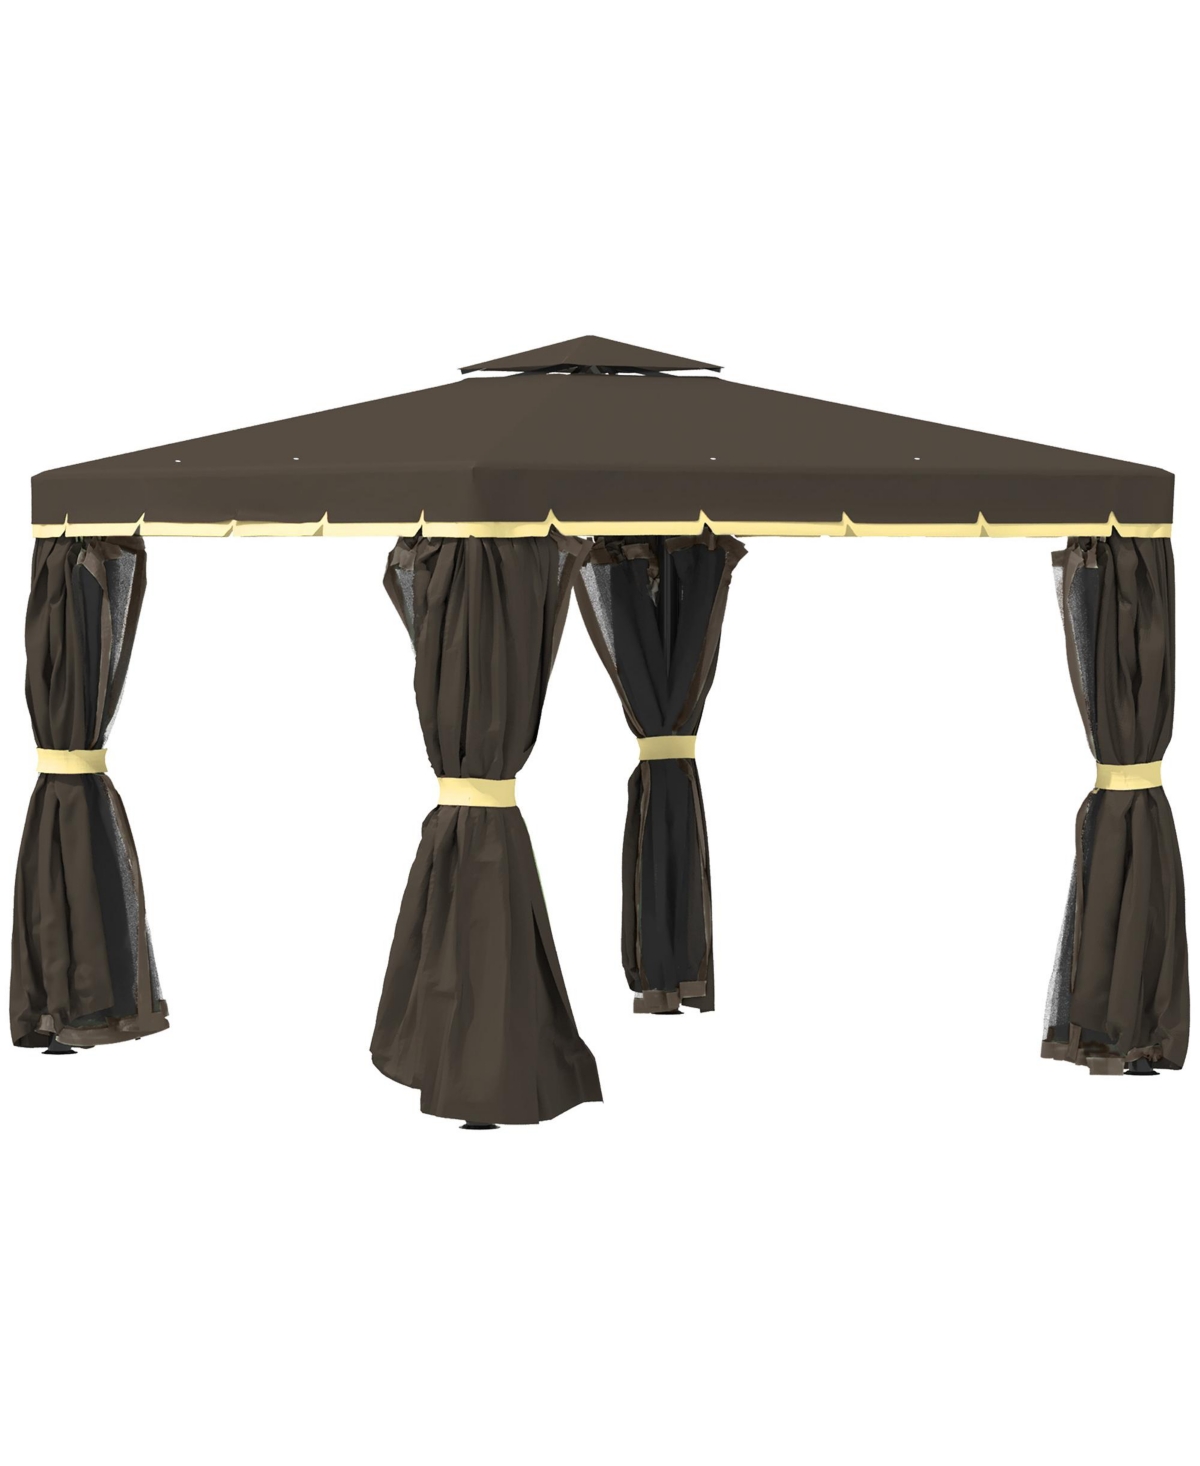 10' x 10' Patio Gazebo, 2 Tier Roof, Netting, Curtains, Outdoor Canopy Shelter for Garden, Lawn, Backyard Deck, Coffee - Brown